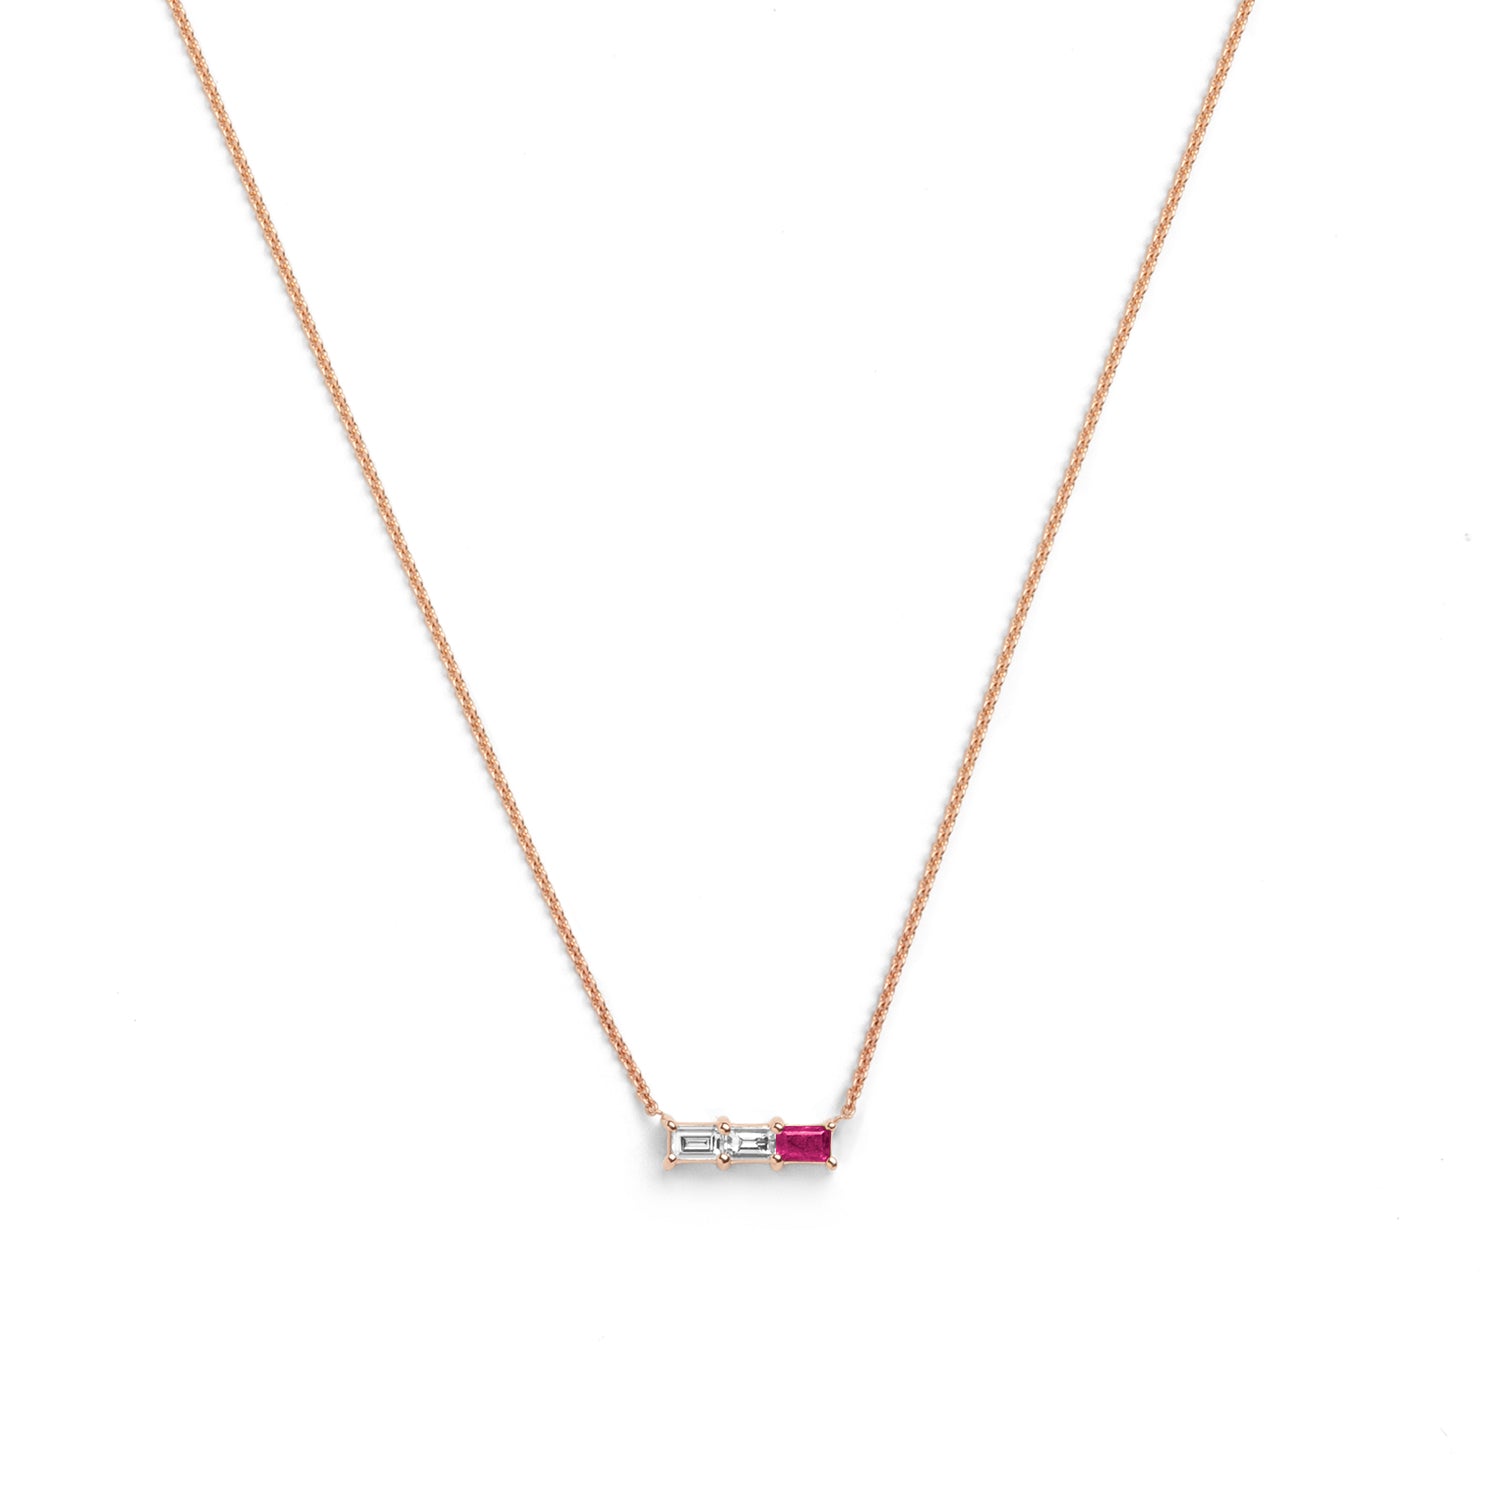 Selin Kent 14K Rhea Necklace with Two Baguette White Diamonds and One Ruby Baguette